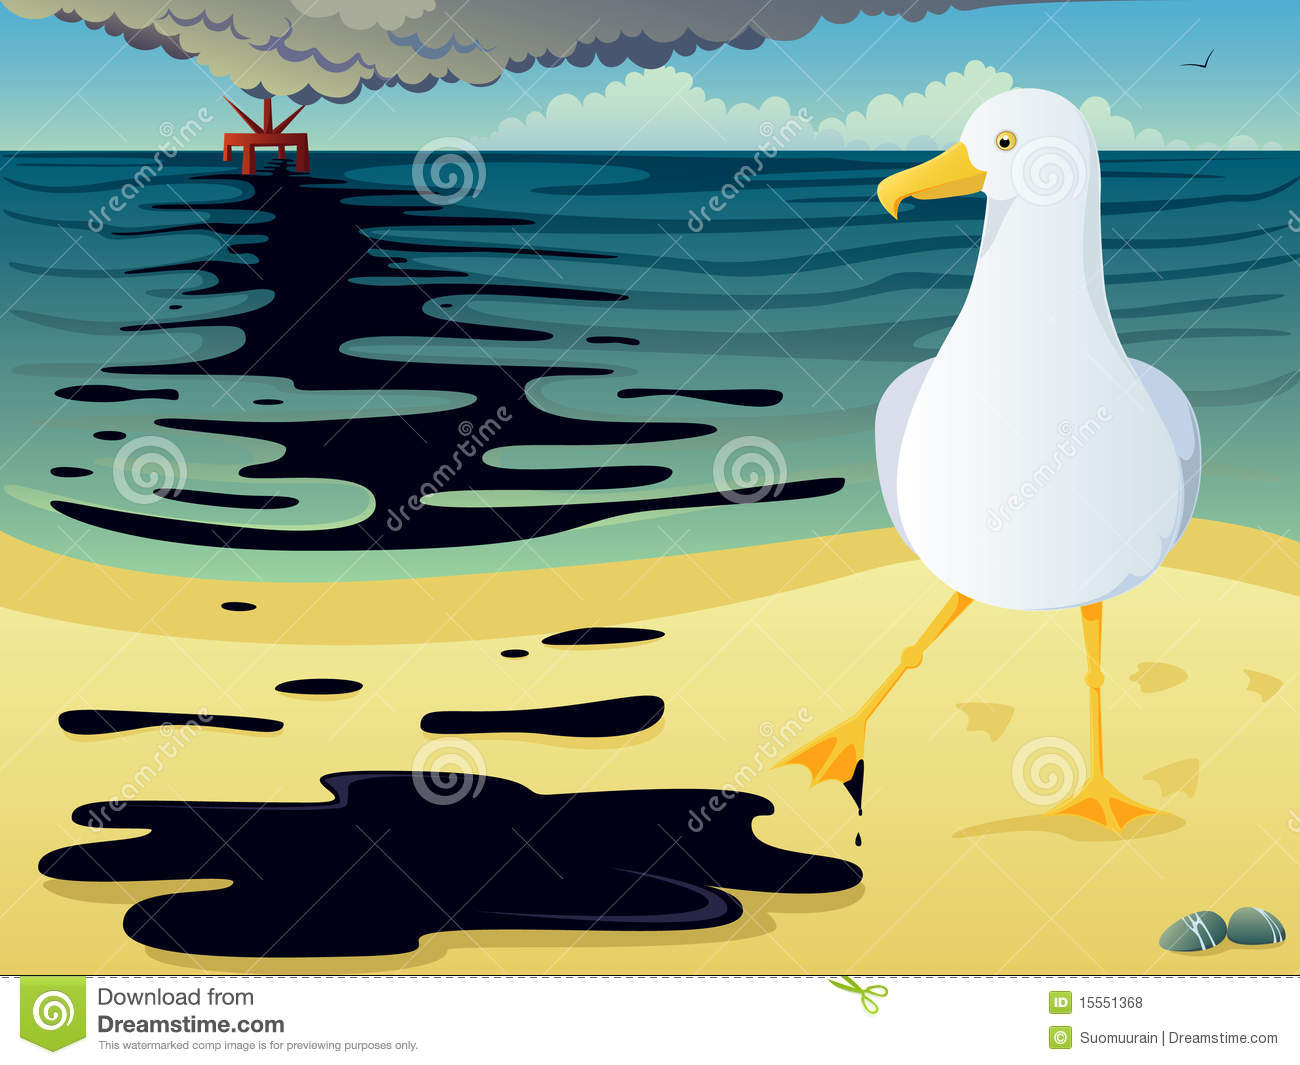 Oil Spill Royalty Free Stock Photos   Image  15551368